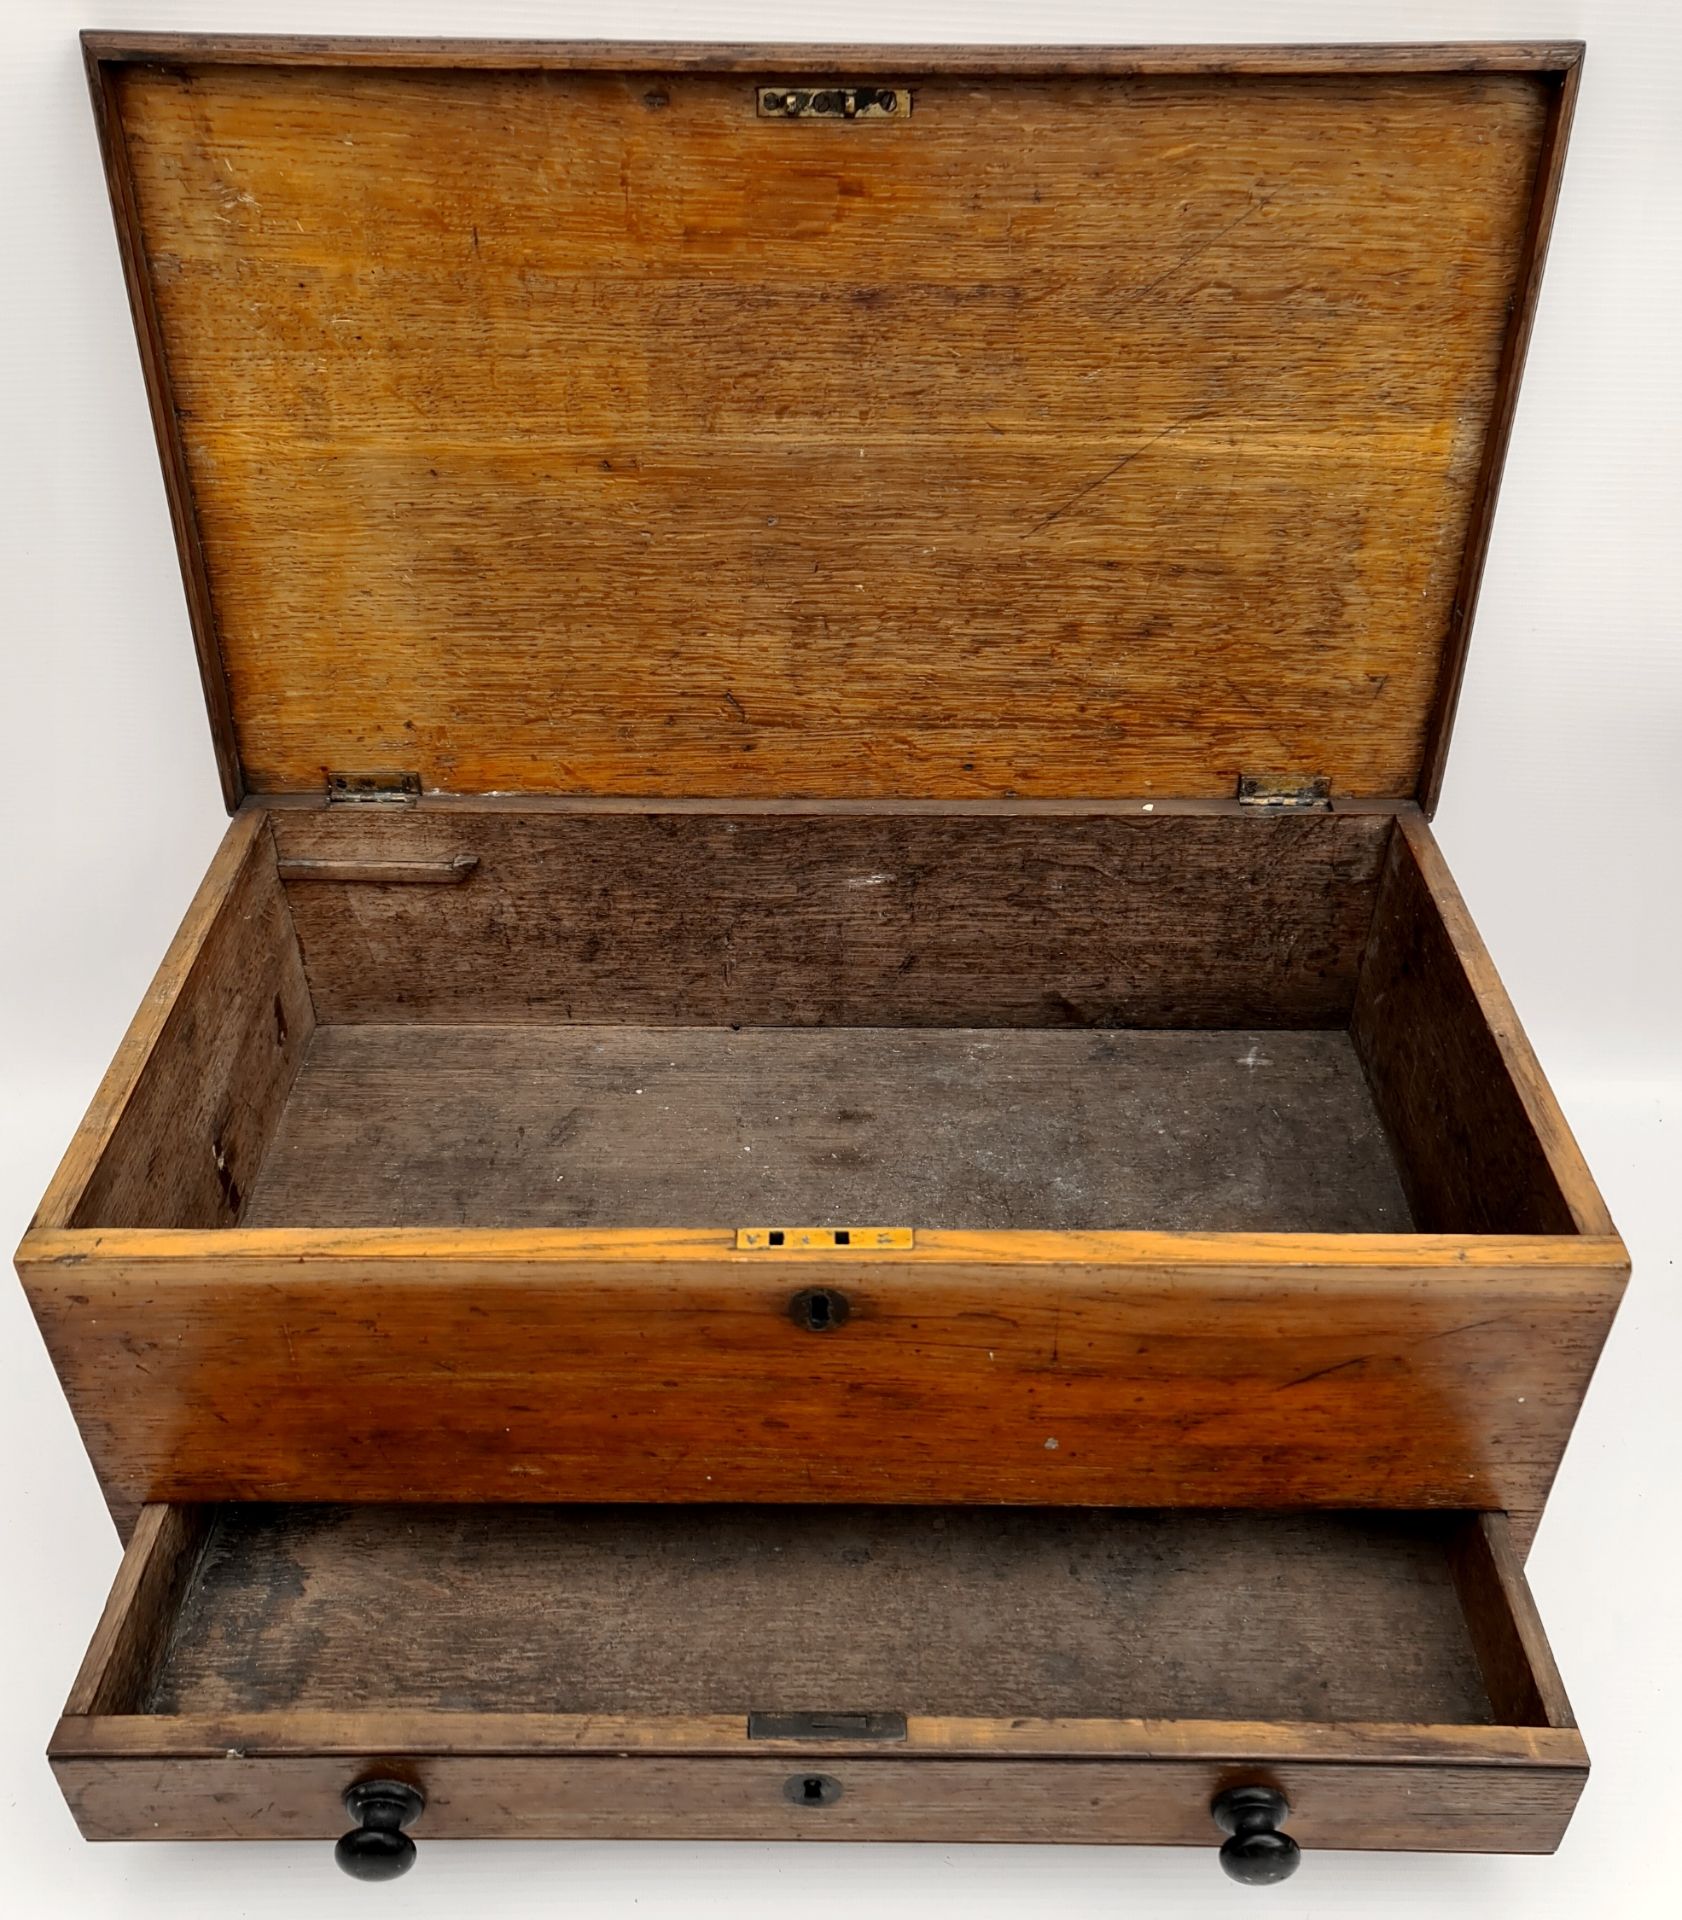 Antique Oak Wooden Tool Chest With Iron Handles